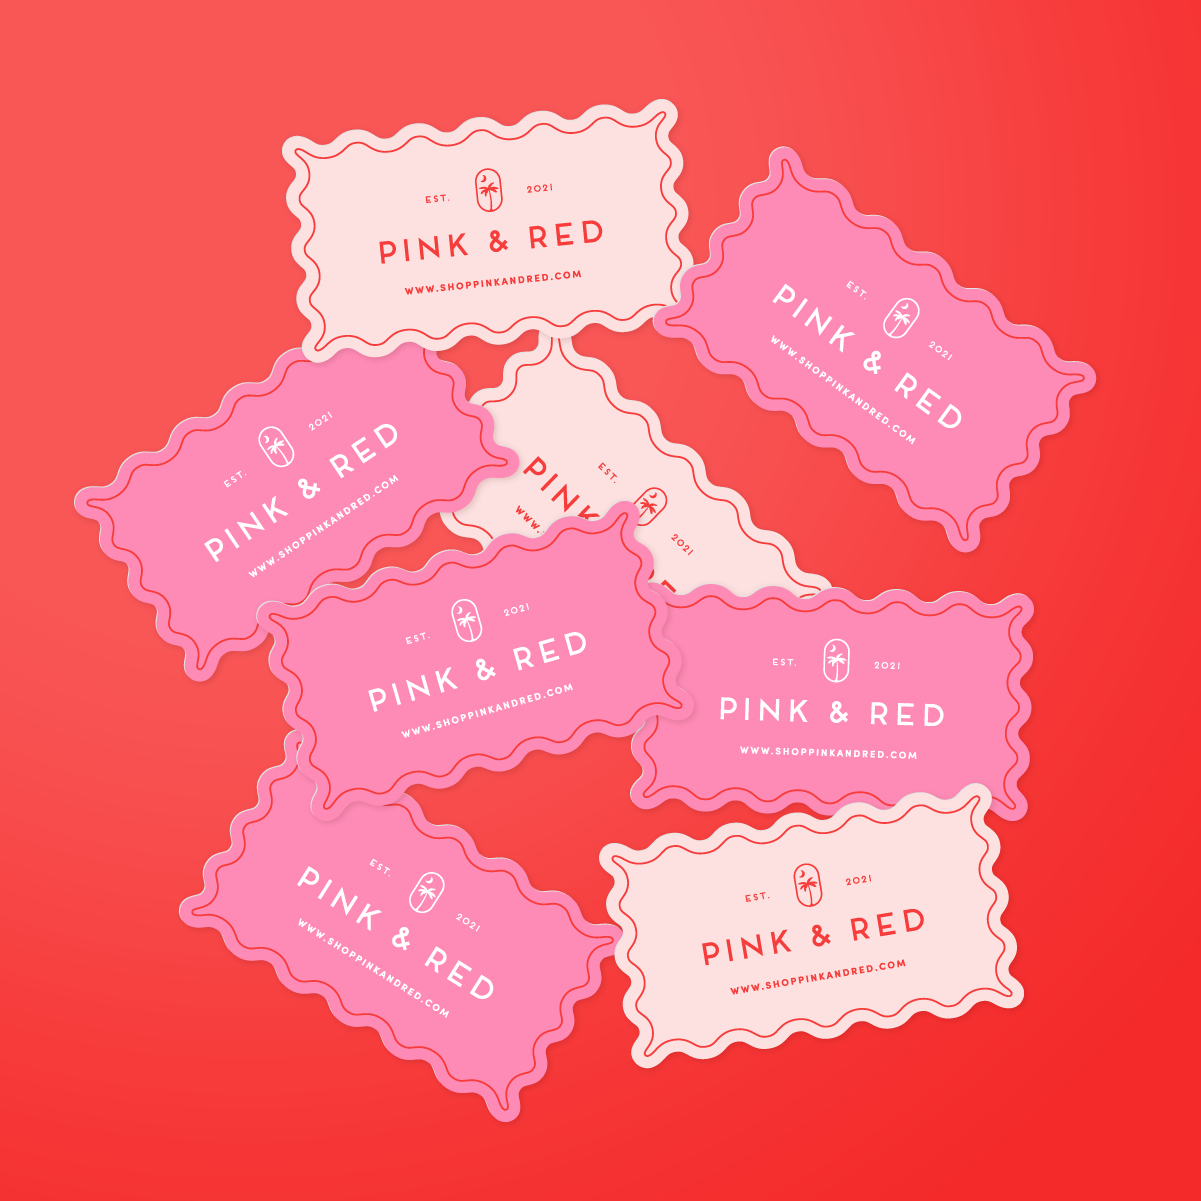 Brand Spotlight: Colorful & Bright Signage and Packaging for Pink & Red Boutique